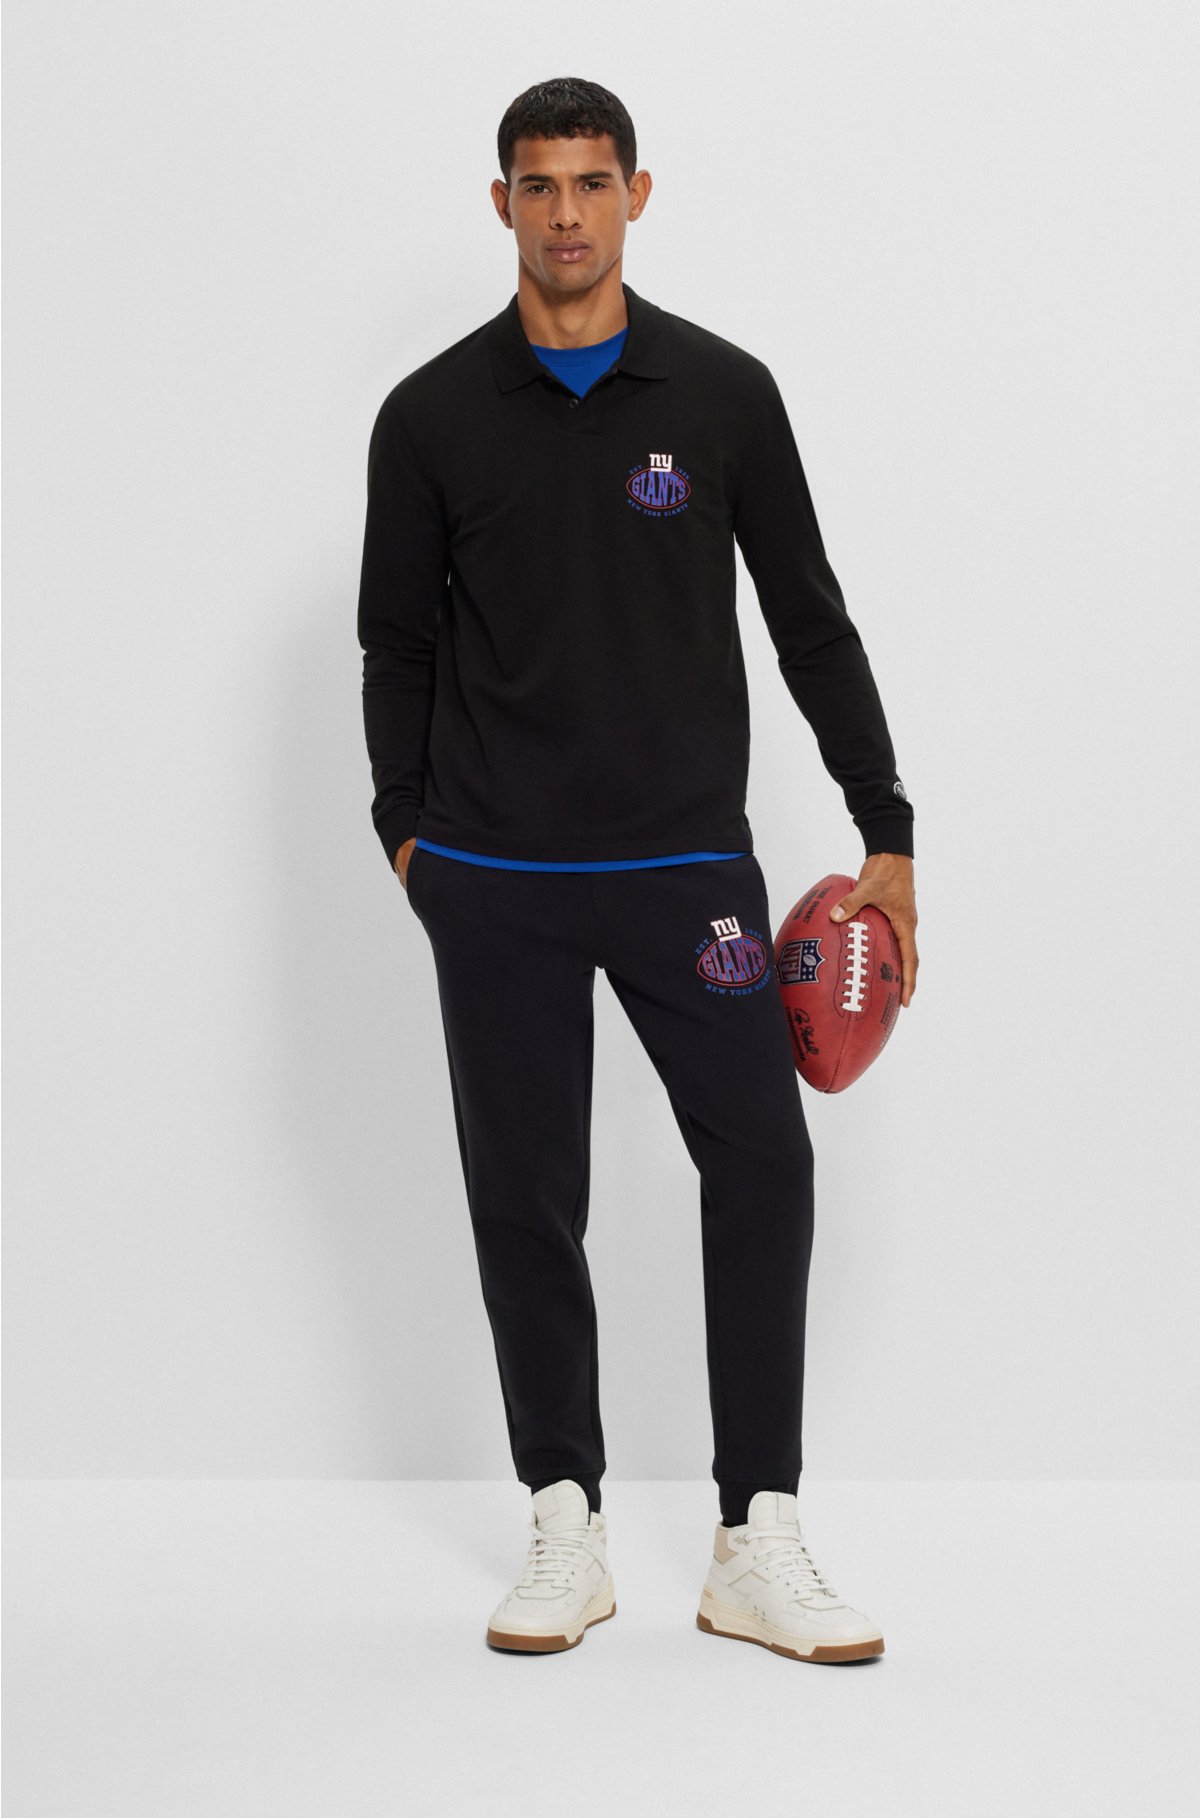 BOSS x NFL long-sleeved polo shirt with collaborative branding, Giants